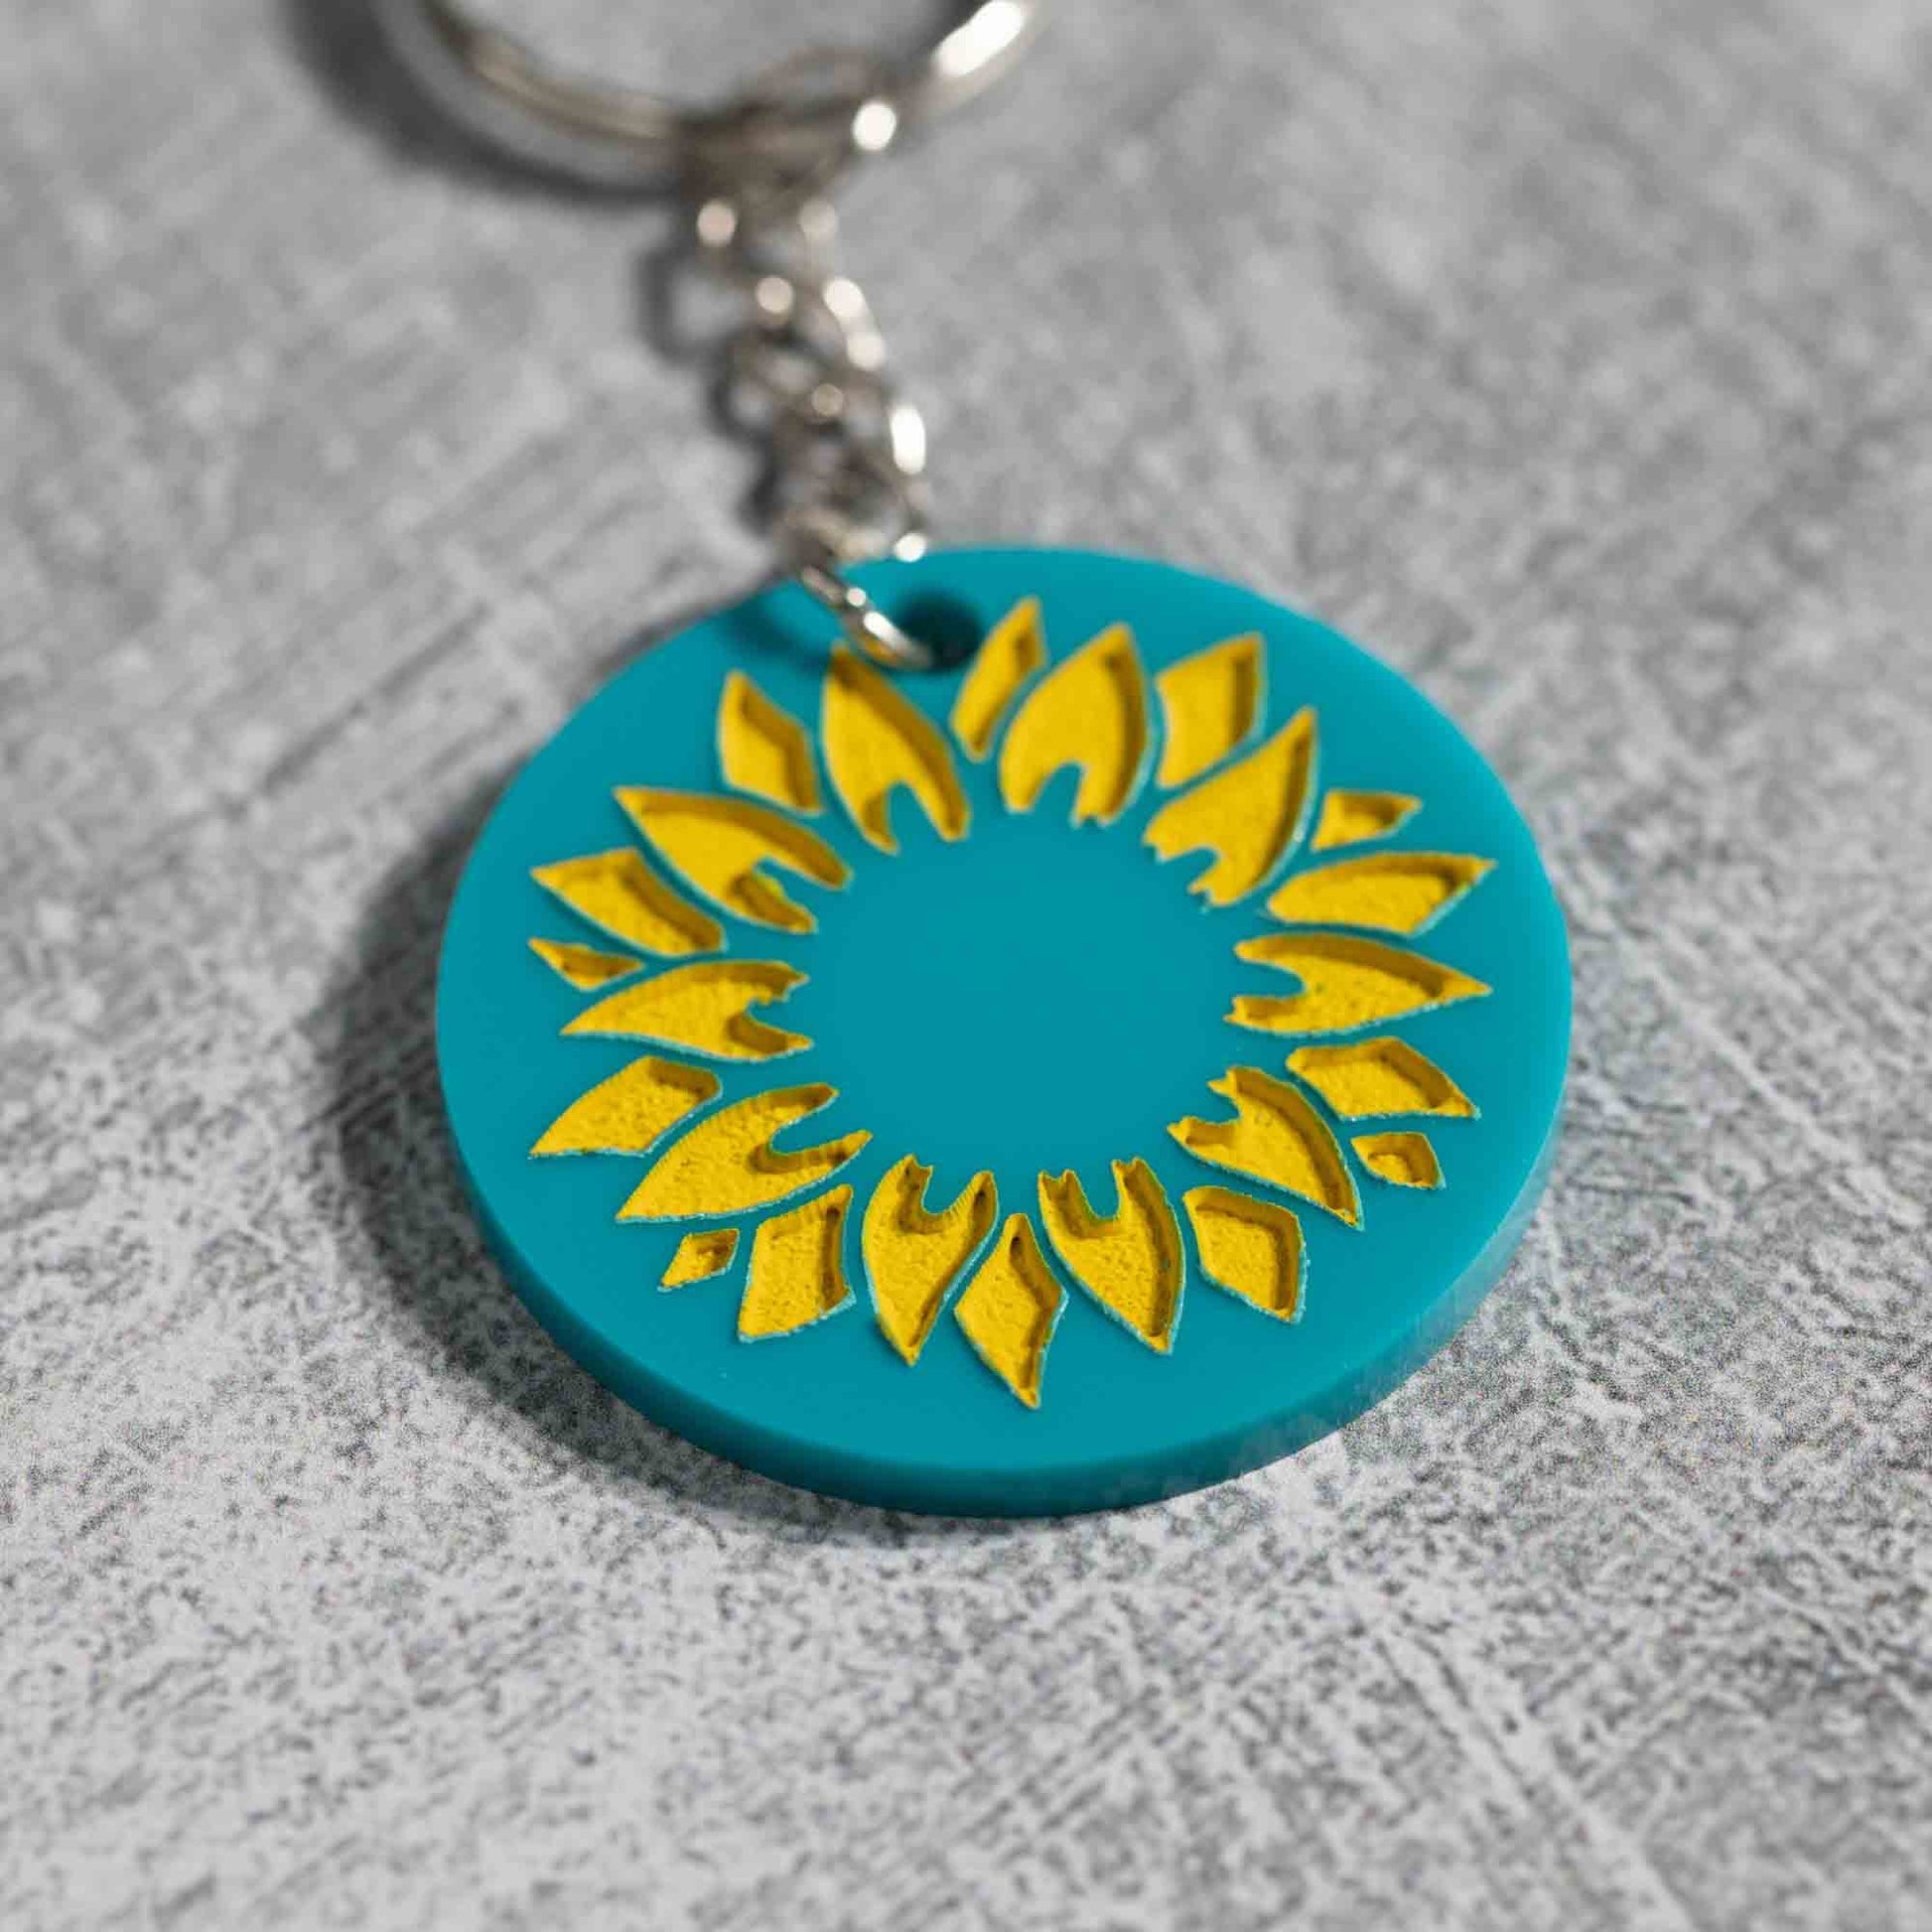 Acrylic Keychains - Turquoise with yellow sunflower - pray for ukraine - by LeeMo Designs in Bend, Oregon